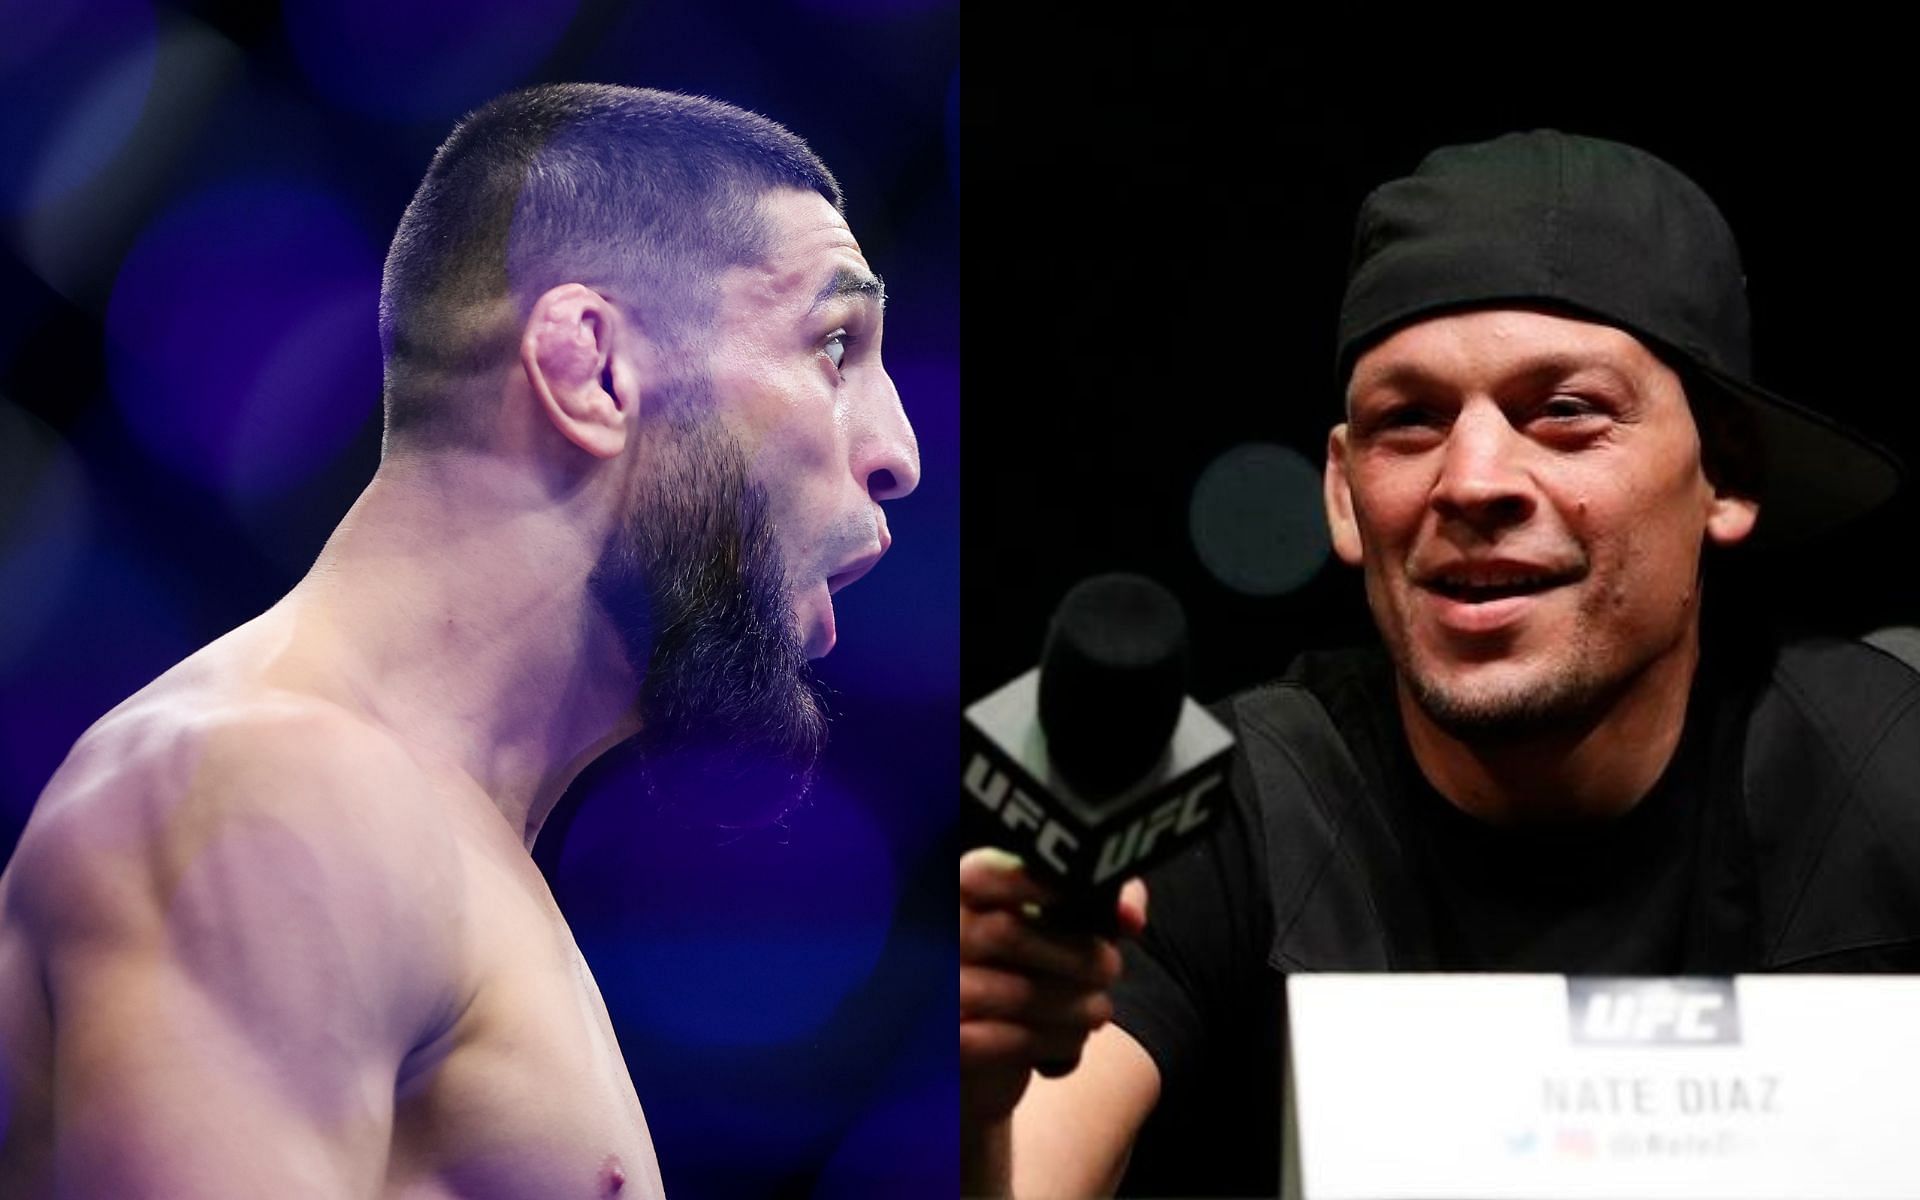 Khamzat Chimaev (left) and Nate Diaz (right). [Images courtesy: left image from Getty Images and right image from EssentiallySports]